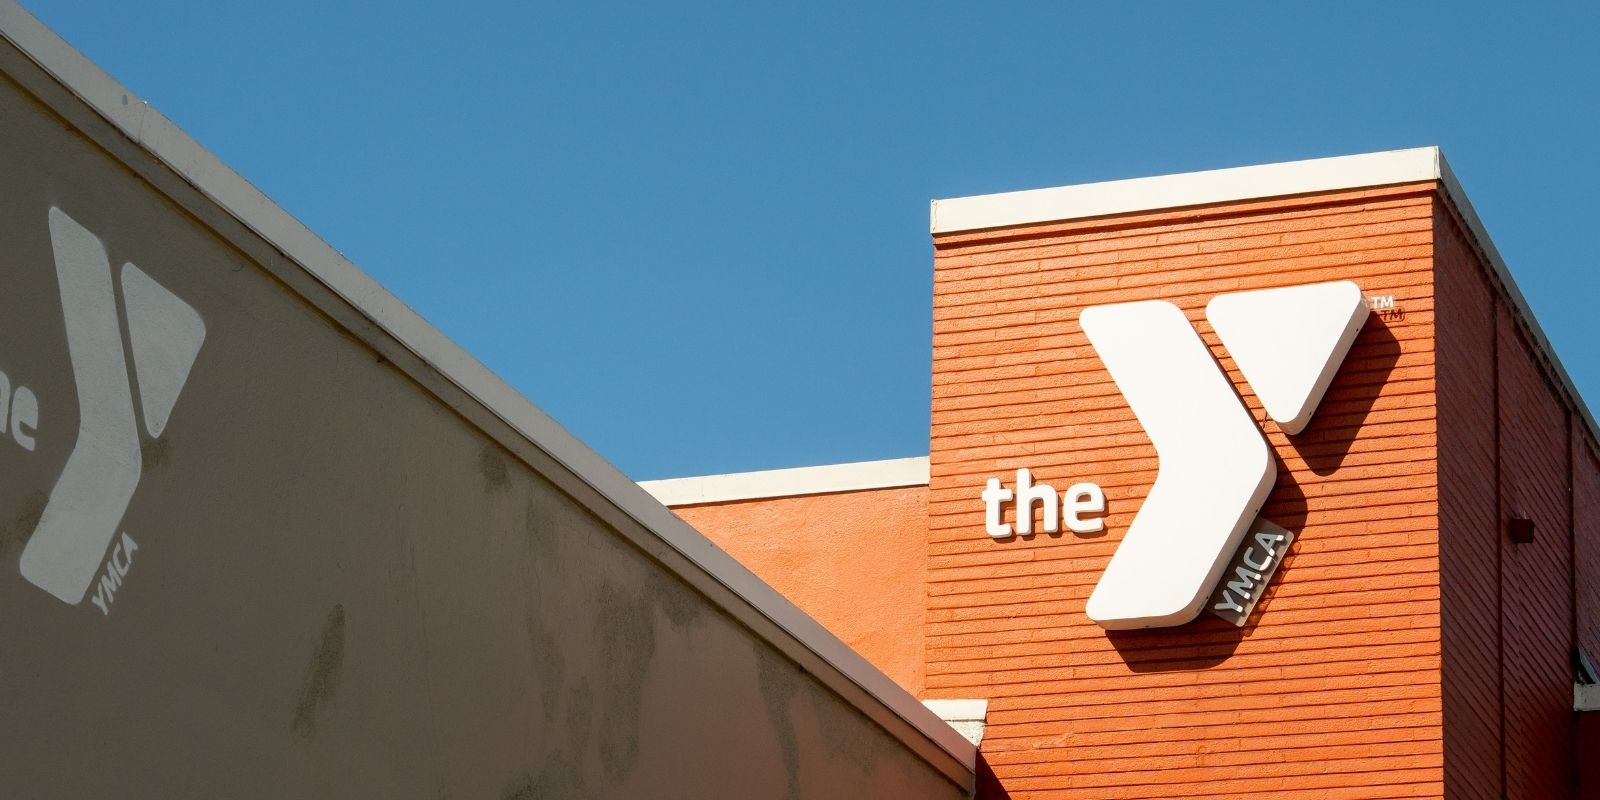 The YMCA sign